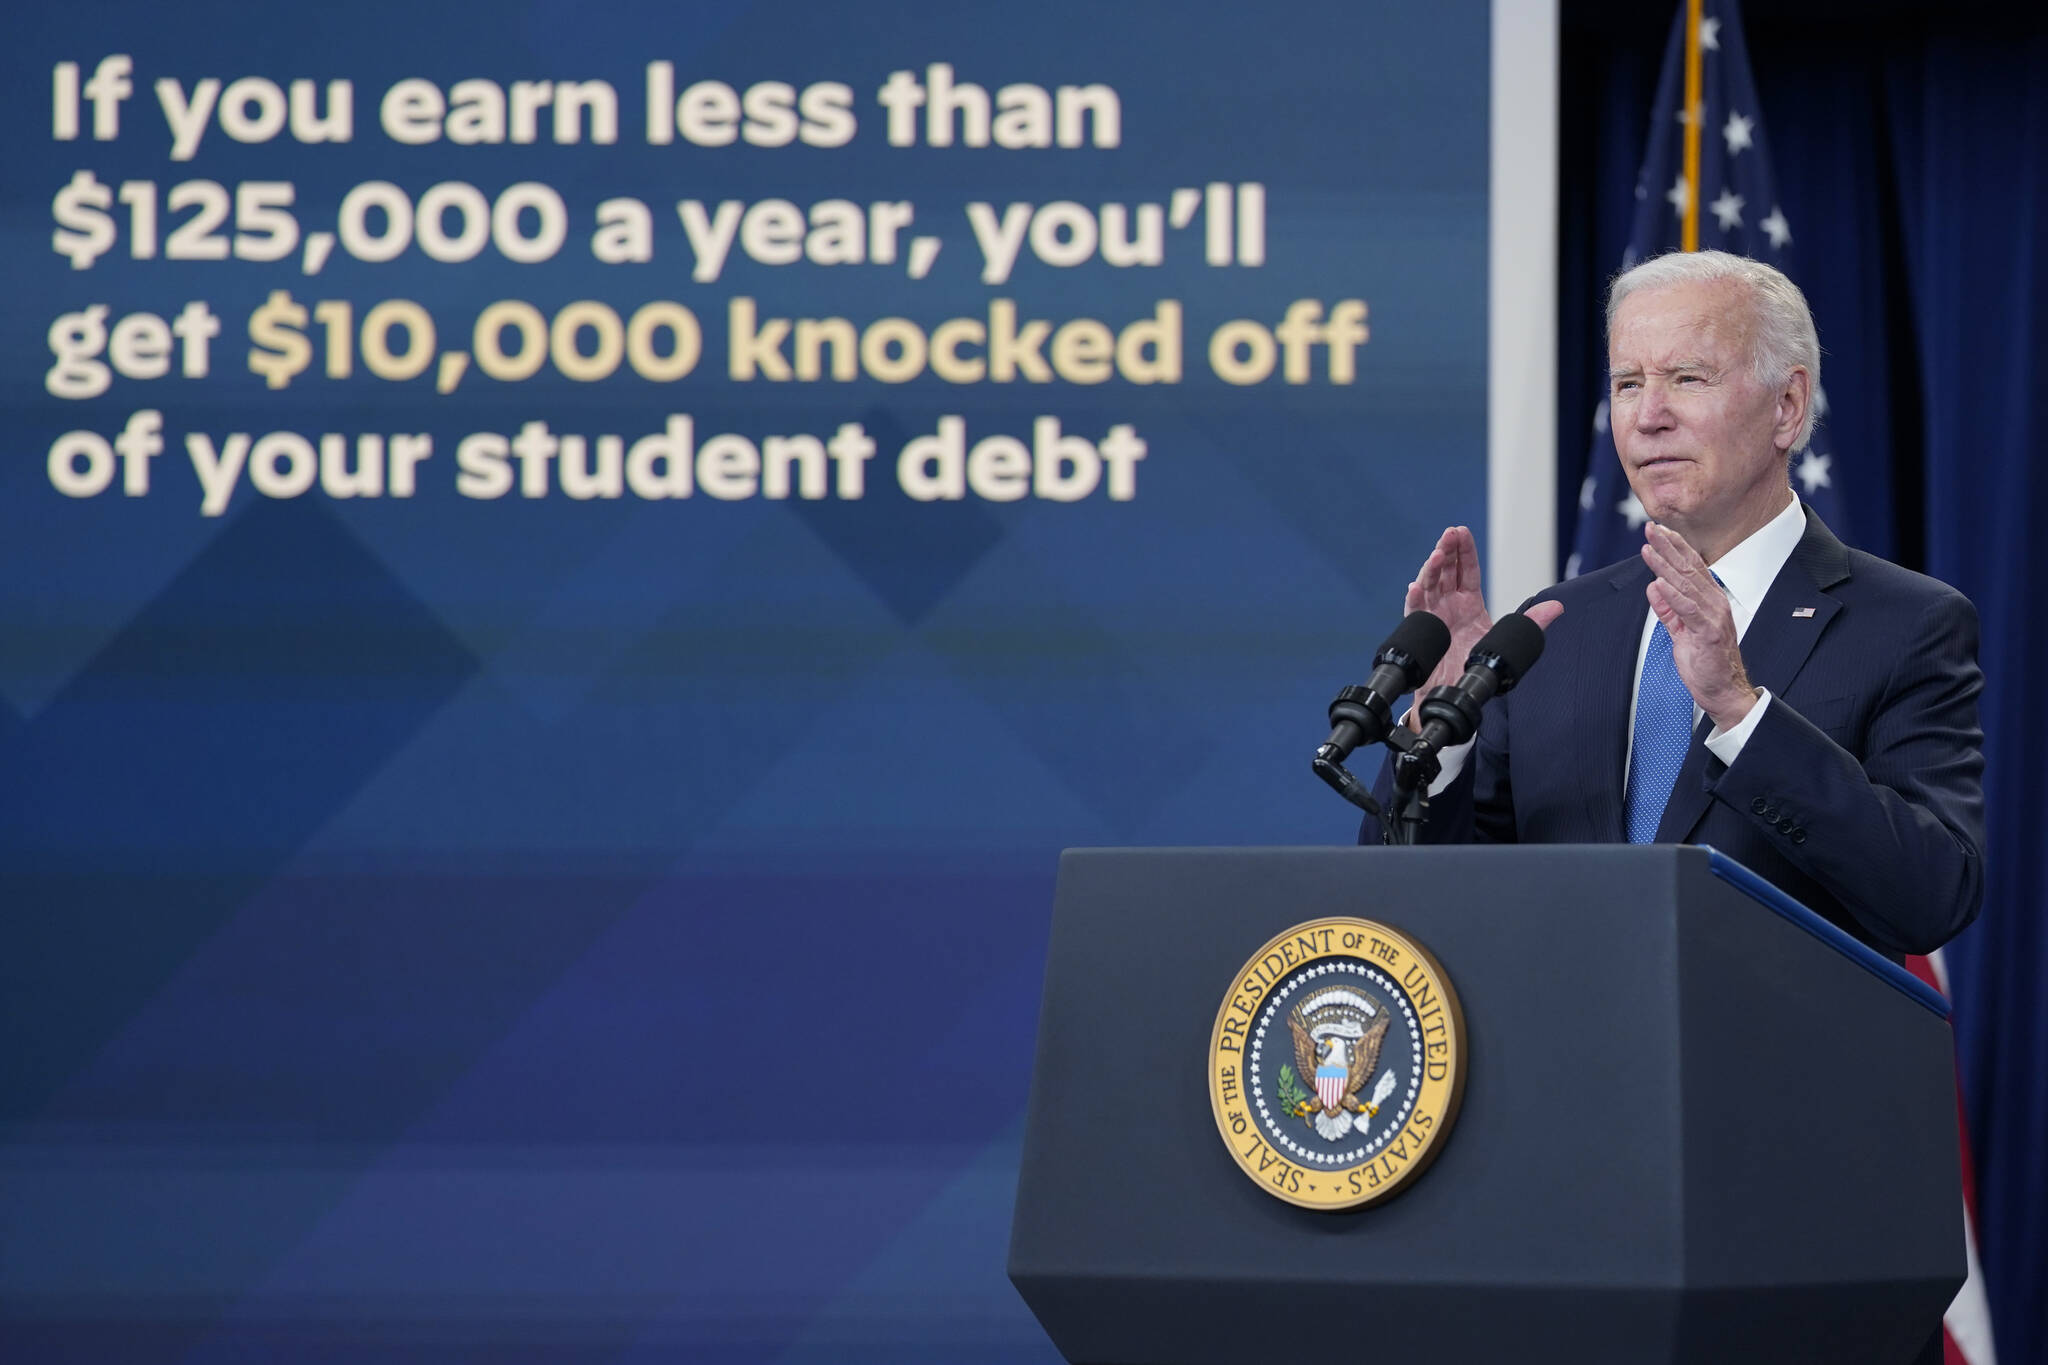 President Joe Biden speaks about the student debt relief portal beta test in the South Court Auditorium on the White House complex in Washington, Oct. 17, 2022. A sharply divided Supreme Court has ruled that the Biden administration overstepped its authority in trying to cancel or reduce student loans for millions of Americans. Conservative justices were in the majority in Friday’s 6-3 decision that effectively killed the $400 billion plan that President Joe Biden announced last year. (AP Photo/Susan Walsh, File)